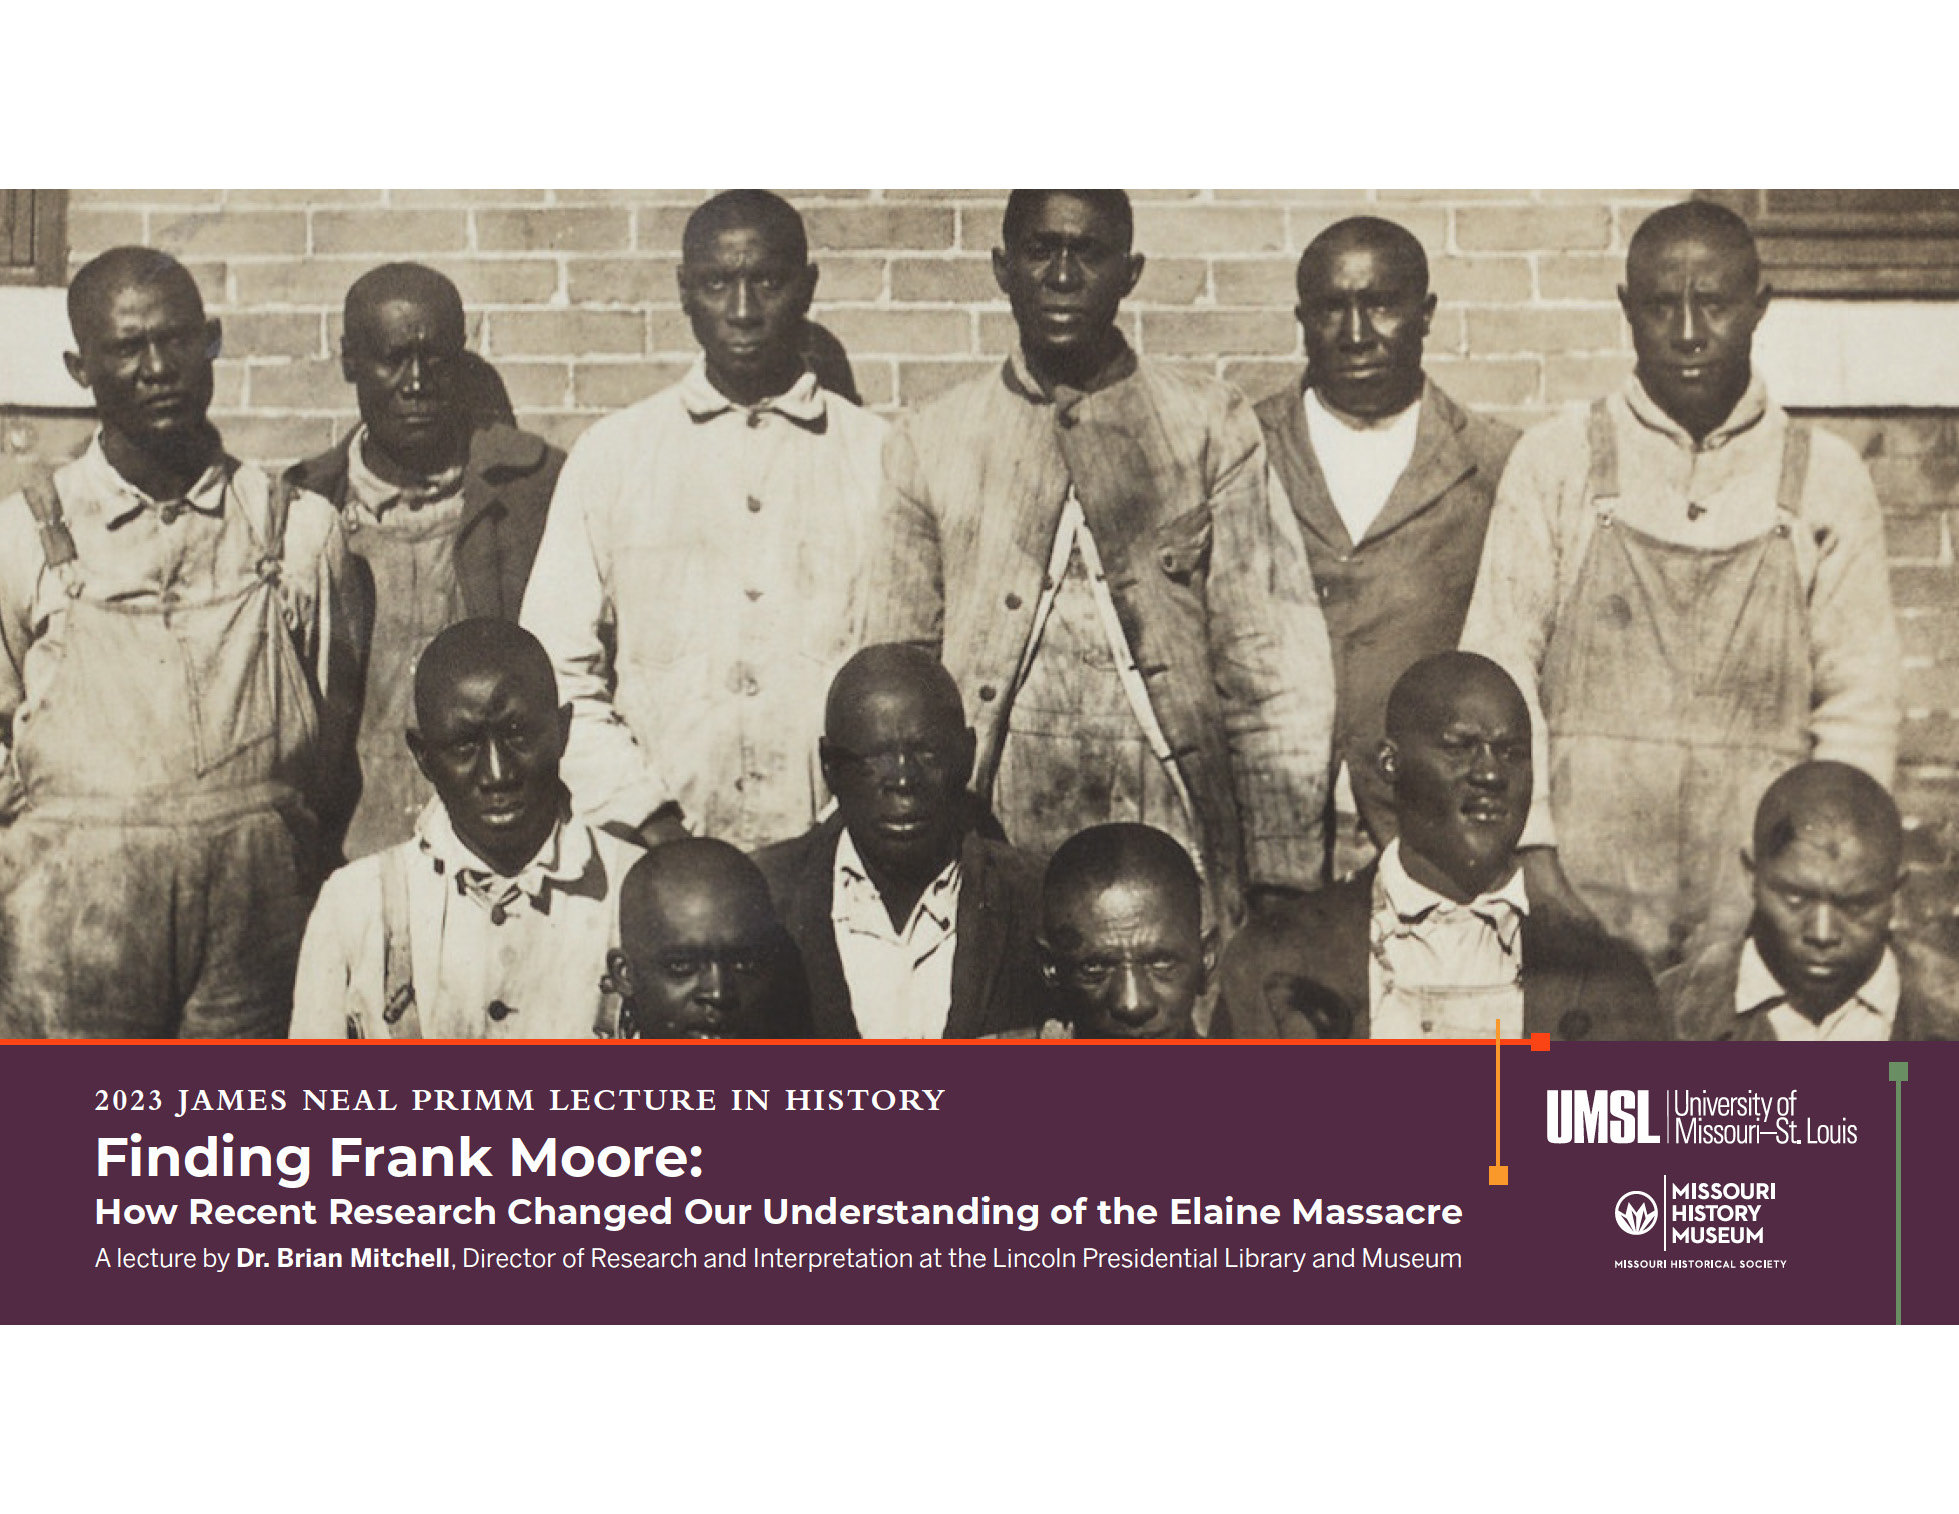 Finding Frank Moore: How Recent Research Changed Our Understanding of the Elaine Massacre